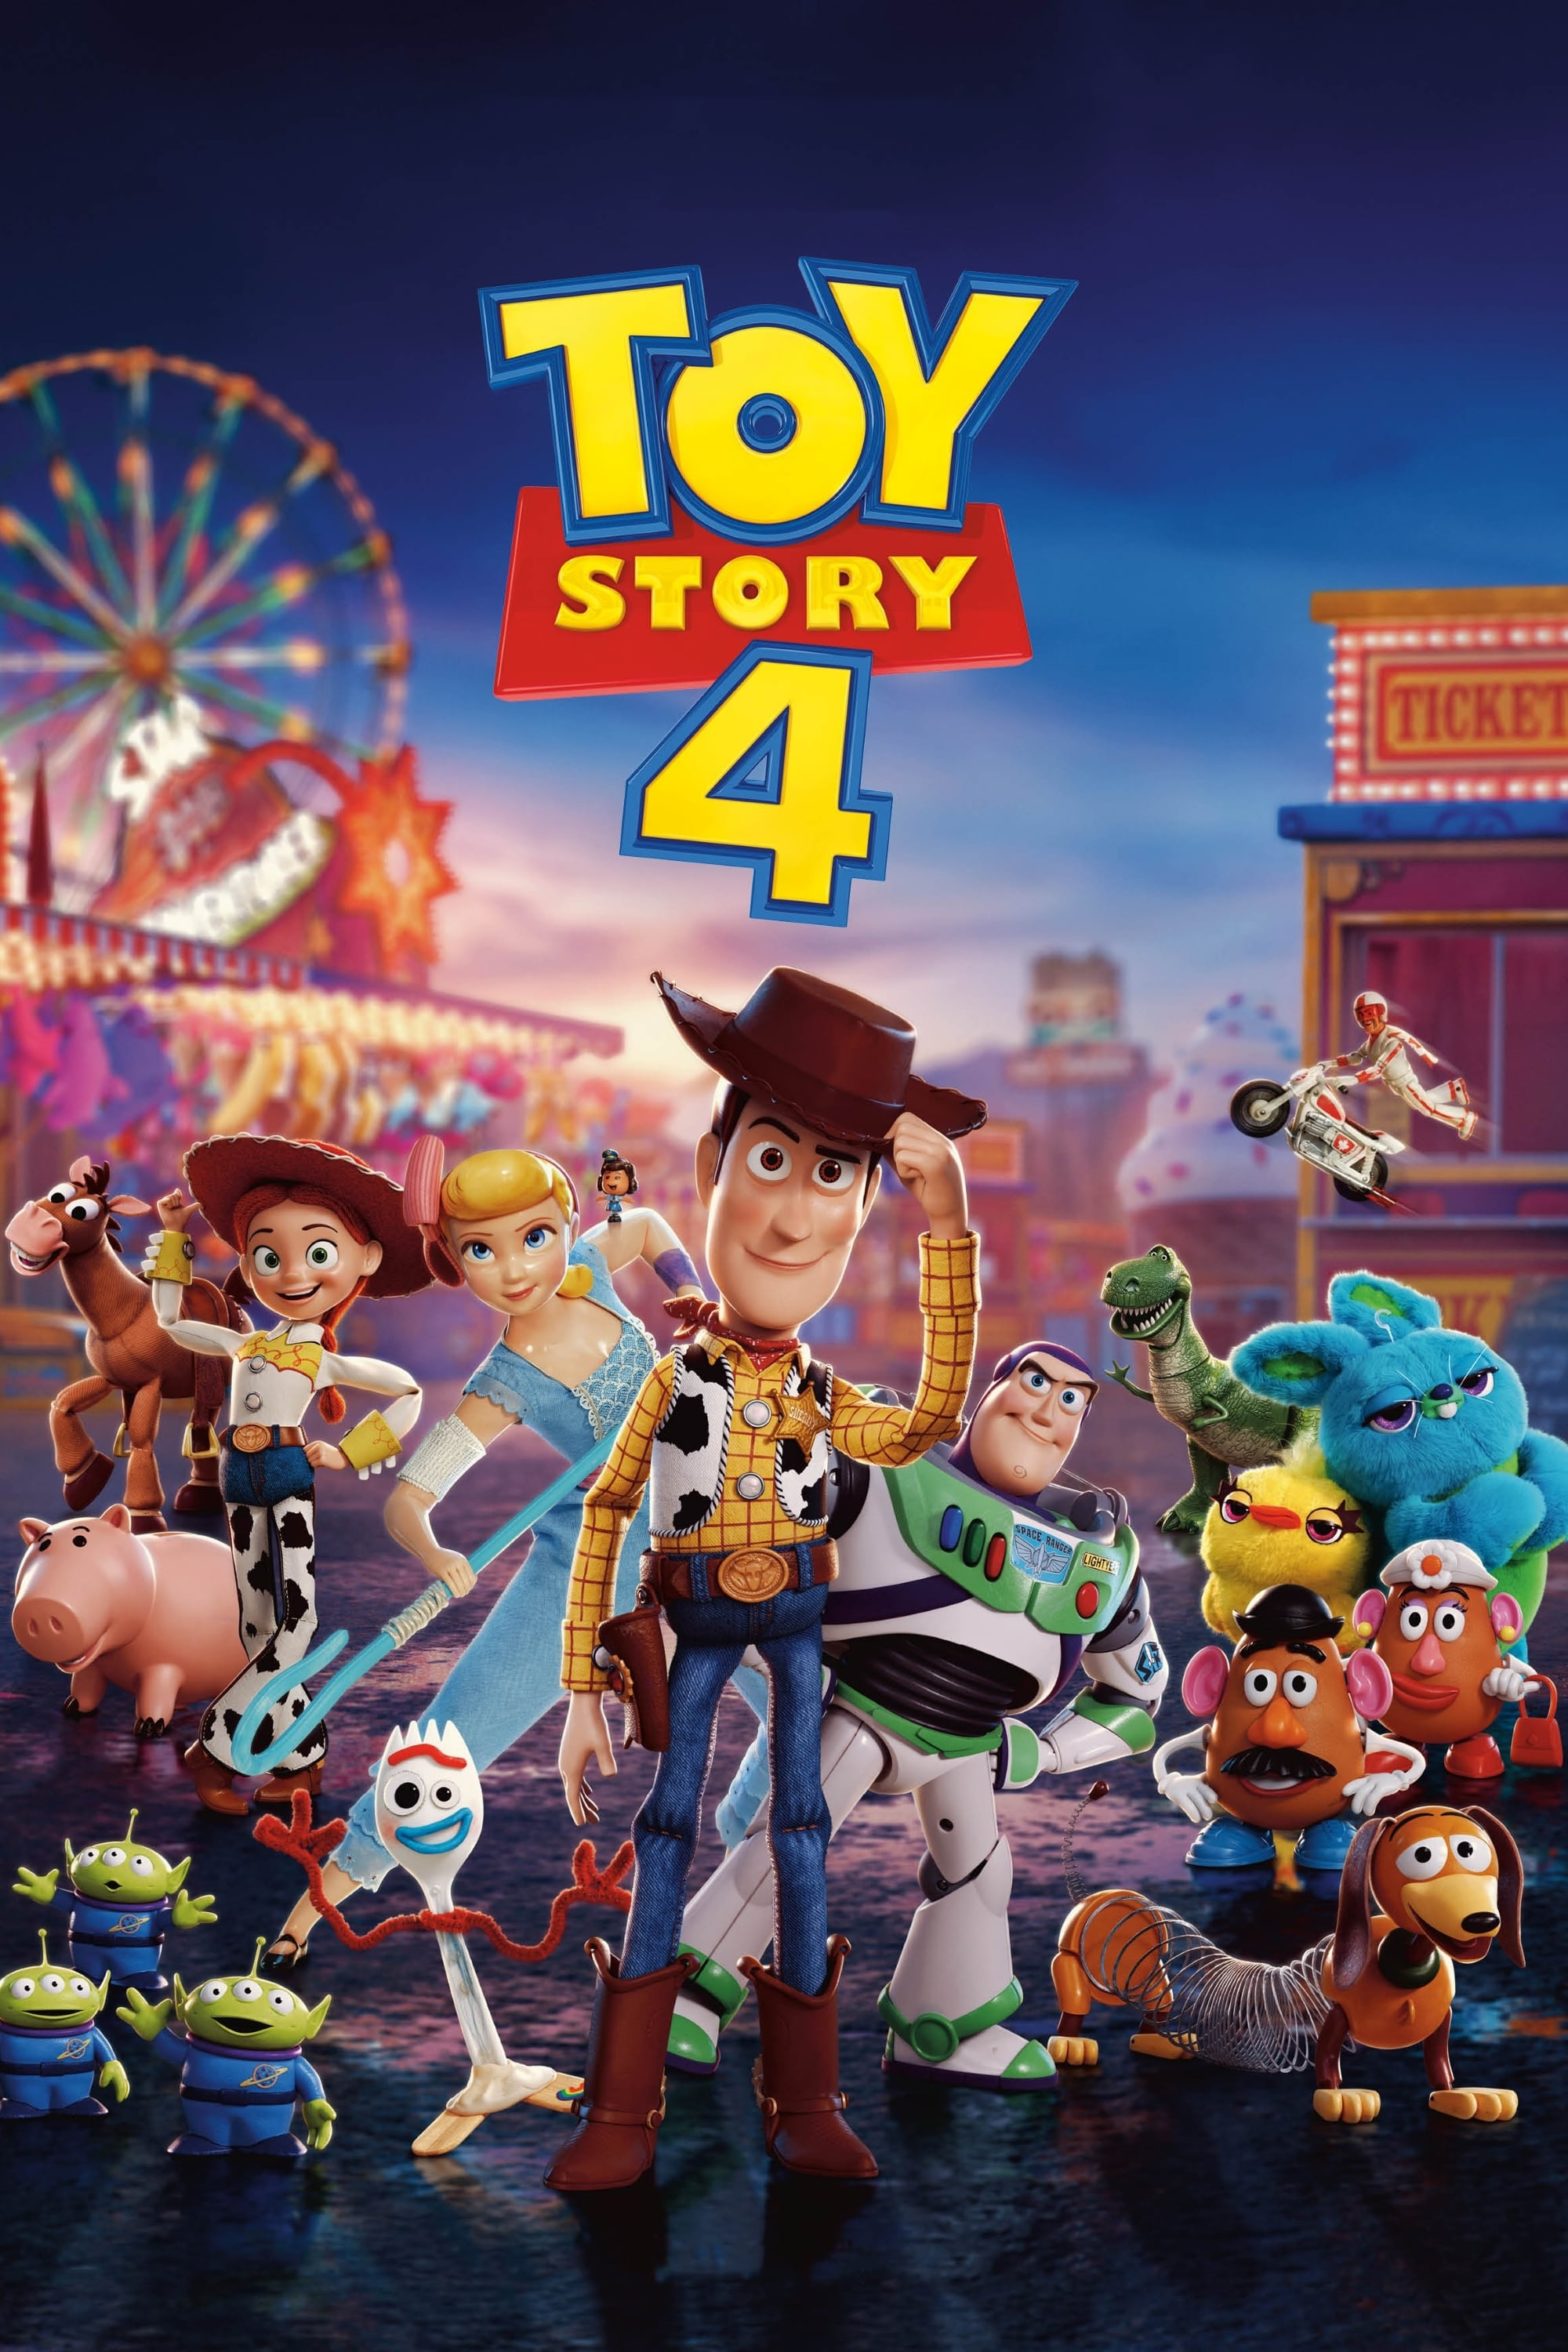 Poster for the movie "Toy Story 4"